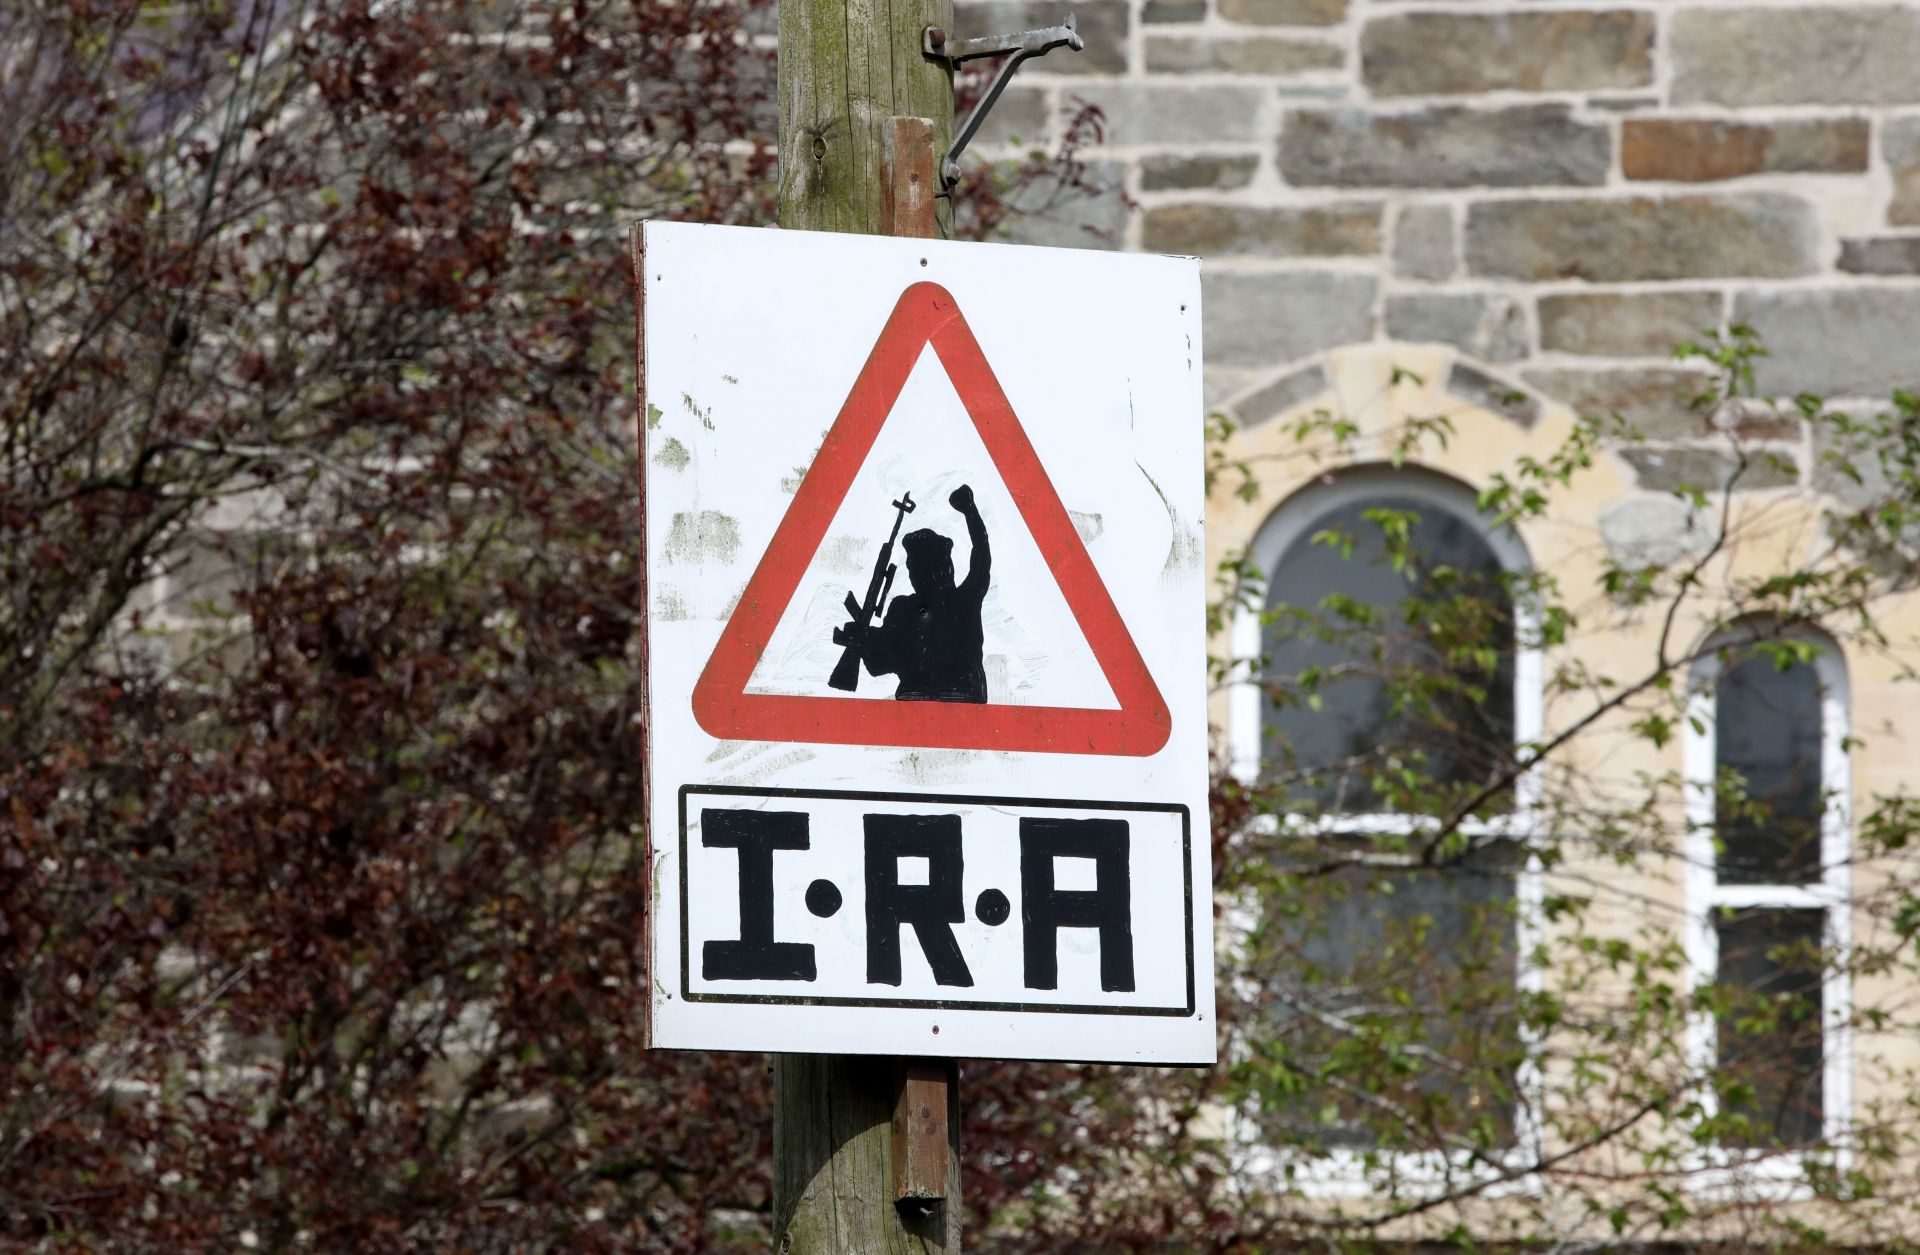 An IRA sniper warning sign on April 20, 2019, overlooking the Bogside area of Londonderry in Northern Ireland.